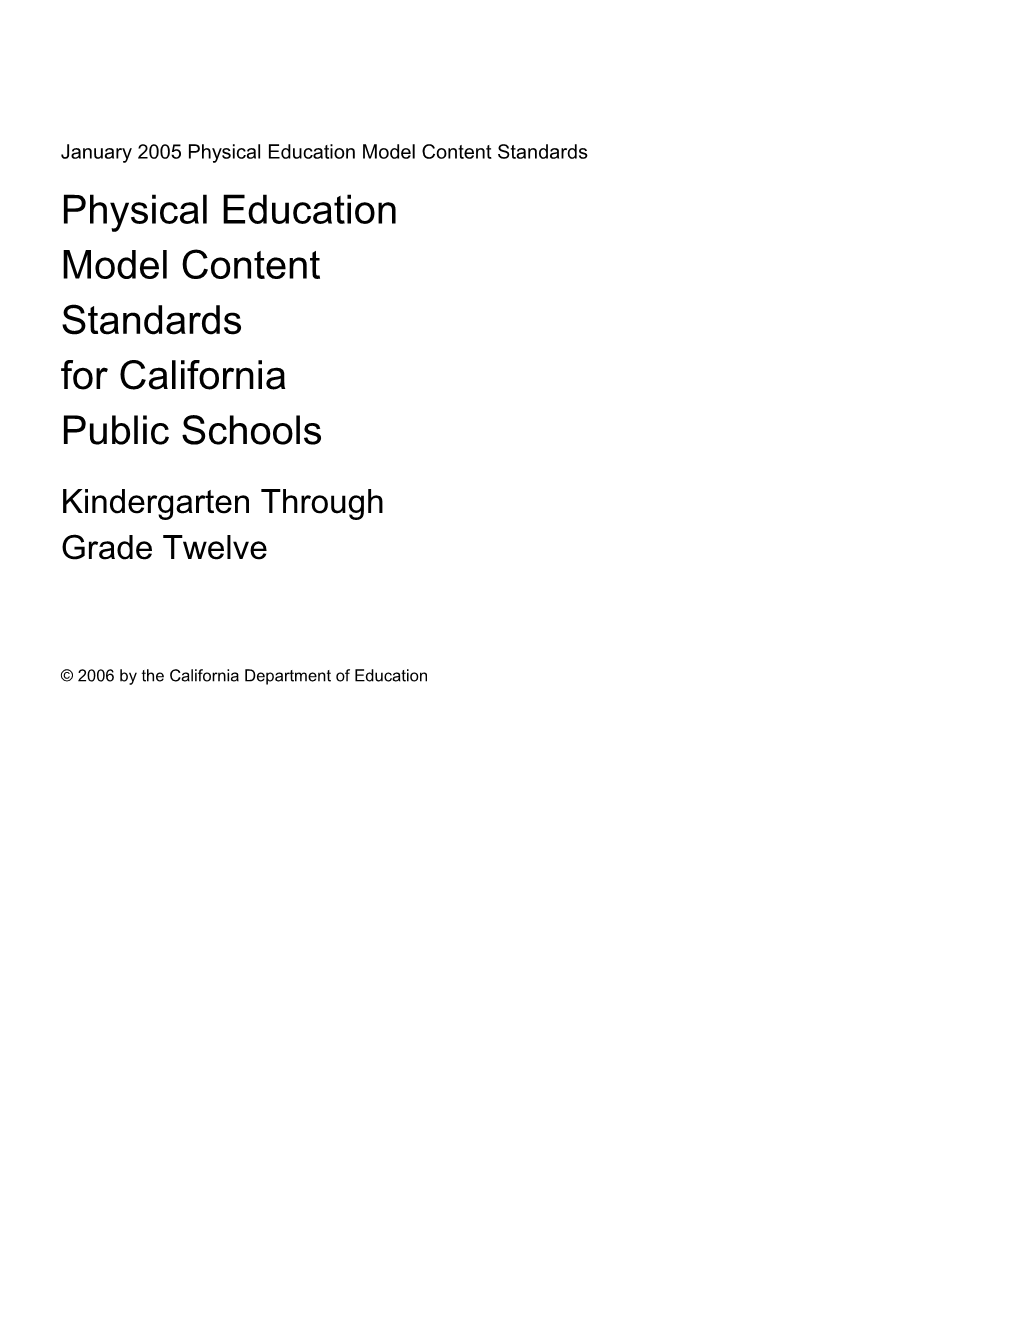 Physical Education Model Content Standards - Curriculum Frameworks (CA Dept of Education)